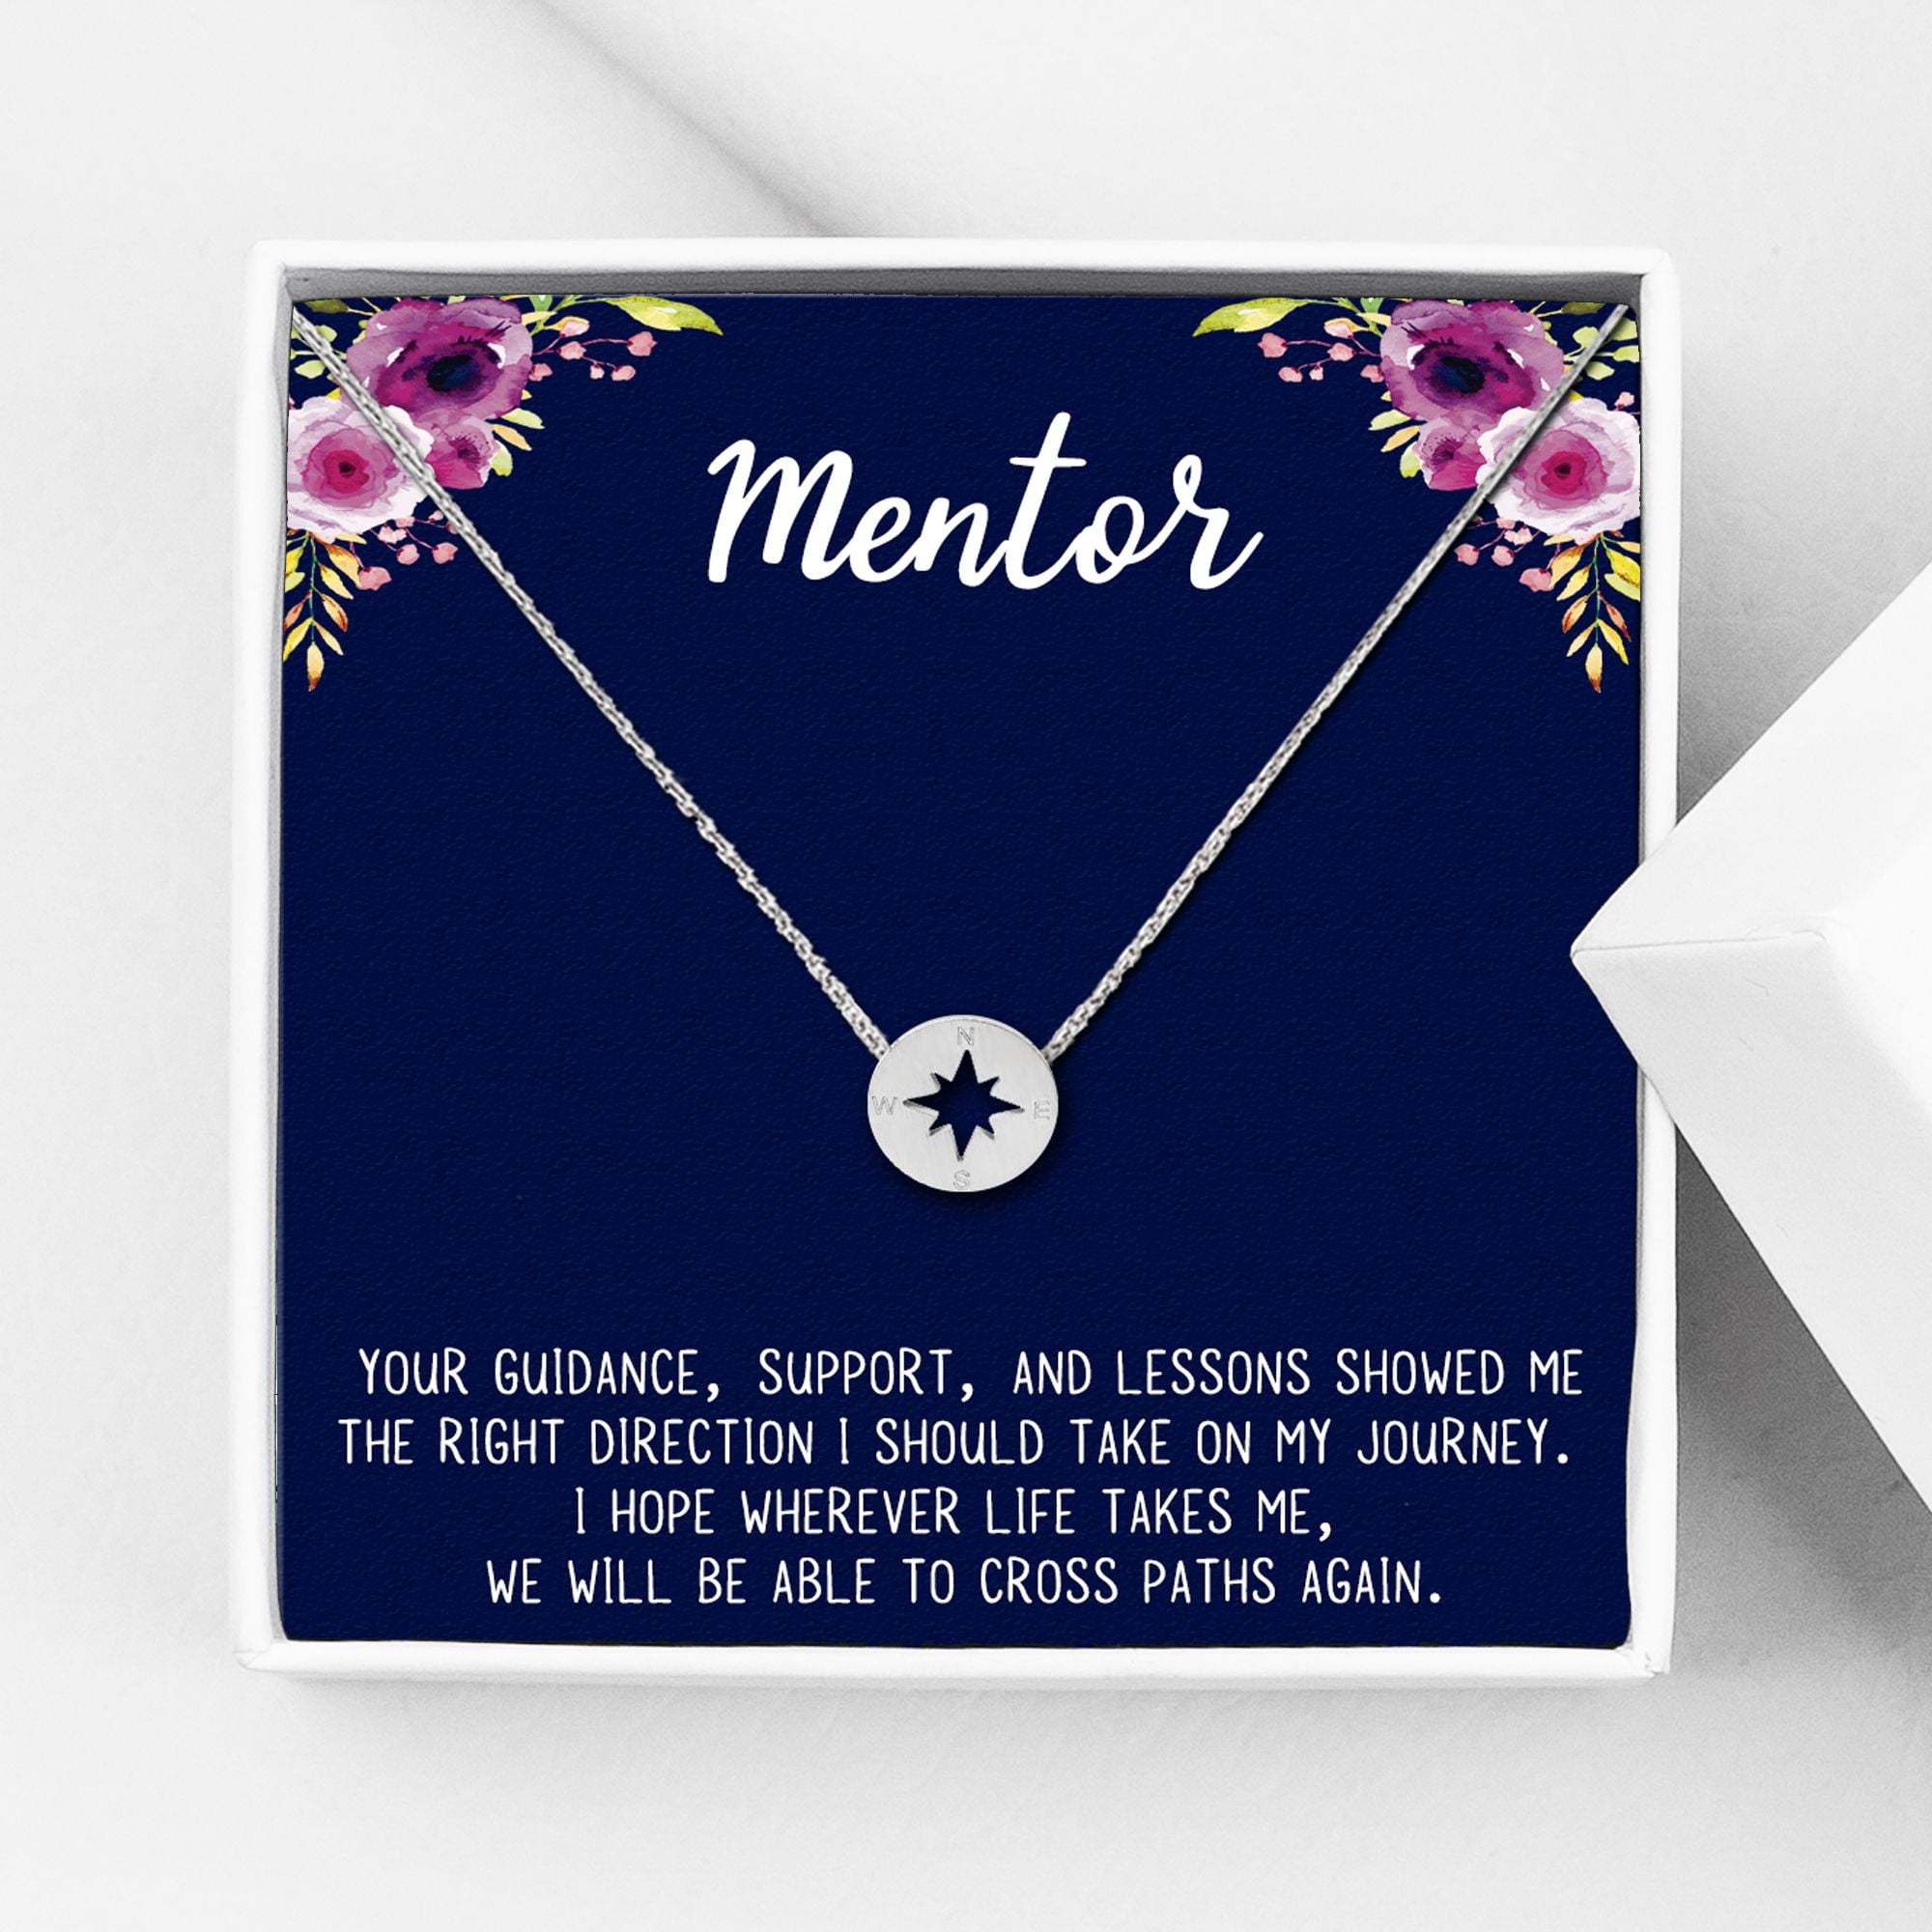 Anavia Mentor Compass Necklace, Compass Mentor Gift, Jewelry Gift, Gifts for Teachers, Gift for Boss, Birthday Gift, Christmas Gift for Her, Compass Necklace Wish -[Silver] - Walmart.com